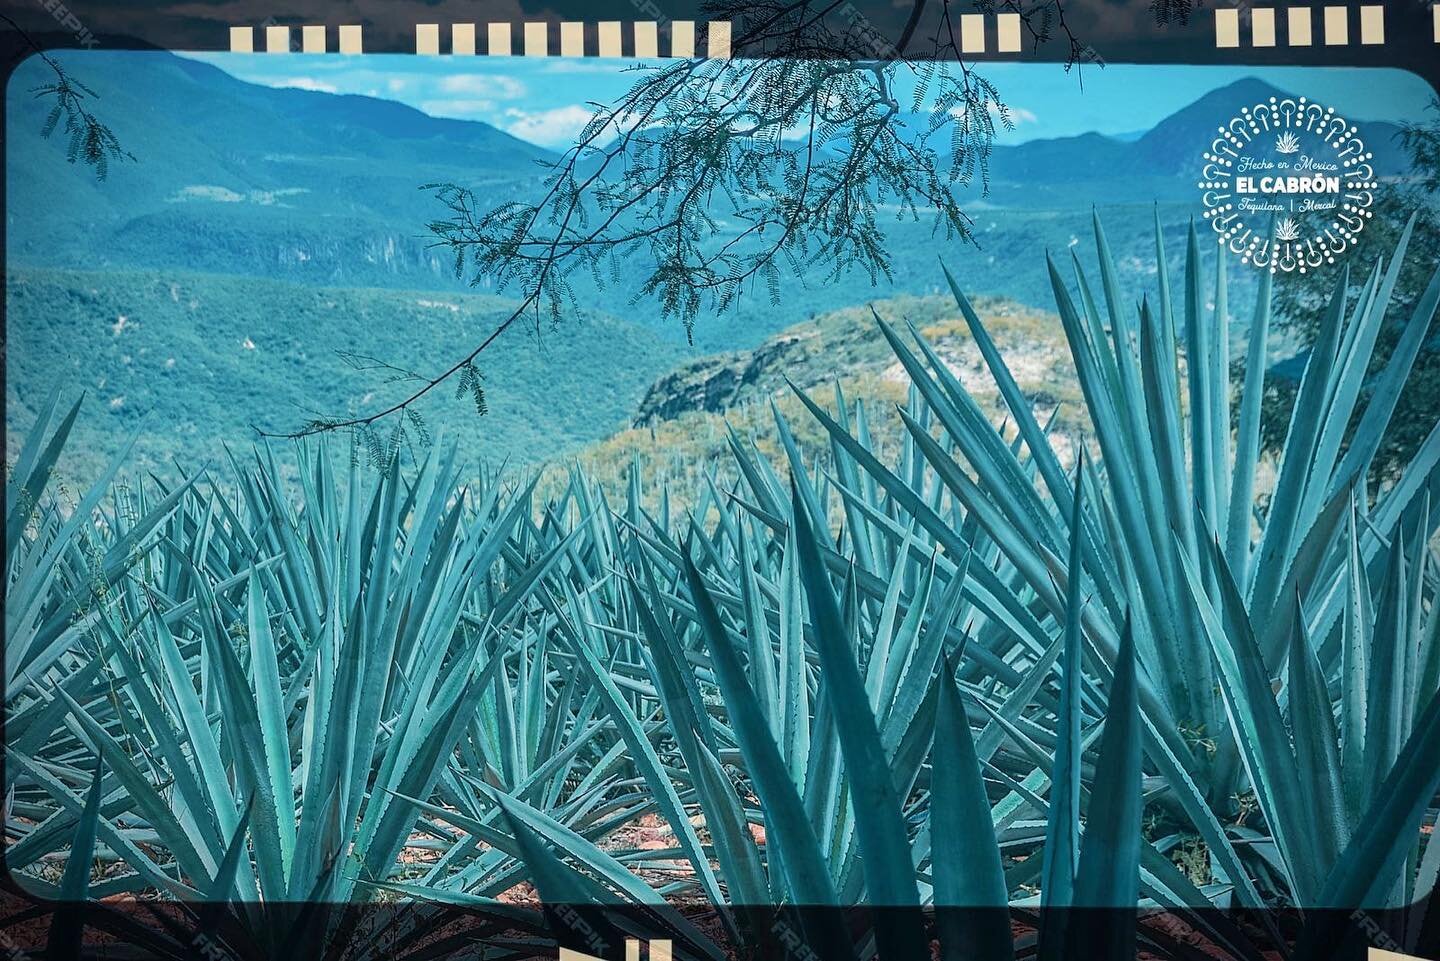 Those dreamy fields of Agave💧

#ElCabron 

#SaludCabron #HappyFriday #Agave #Mezcal #MexicoMagico #Nature #Agriculture #Artisanal #Crafted #Mexico #Oaxaca